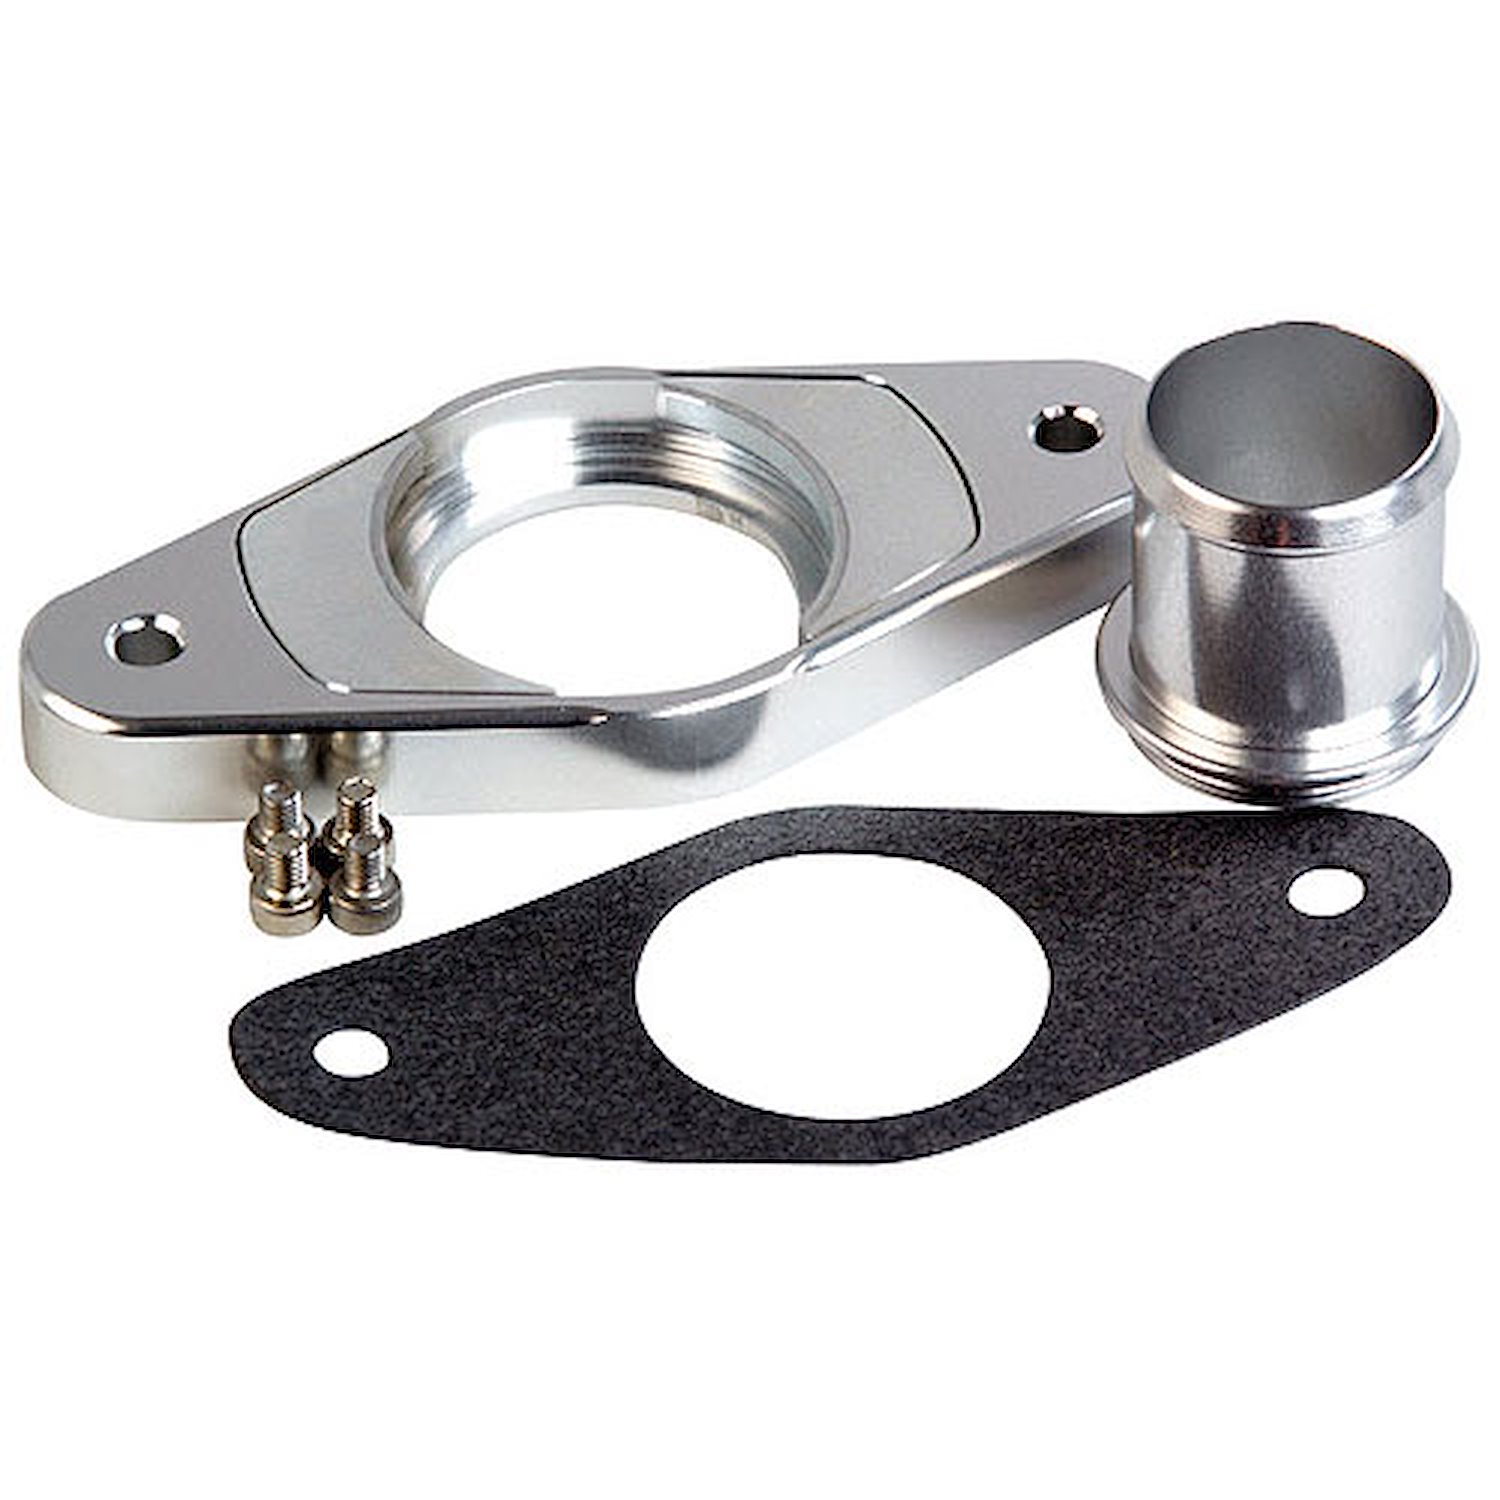 Type 5 BOV Flange Adapter Kit Fits for